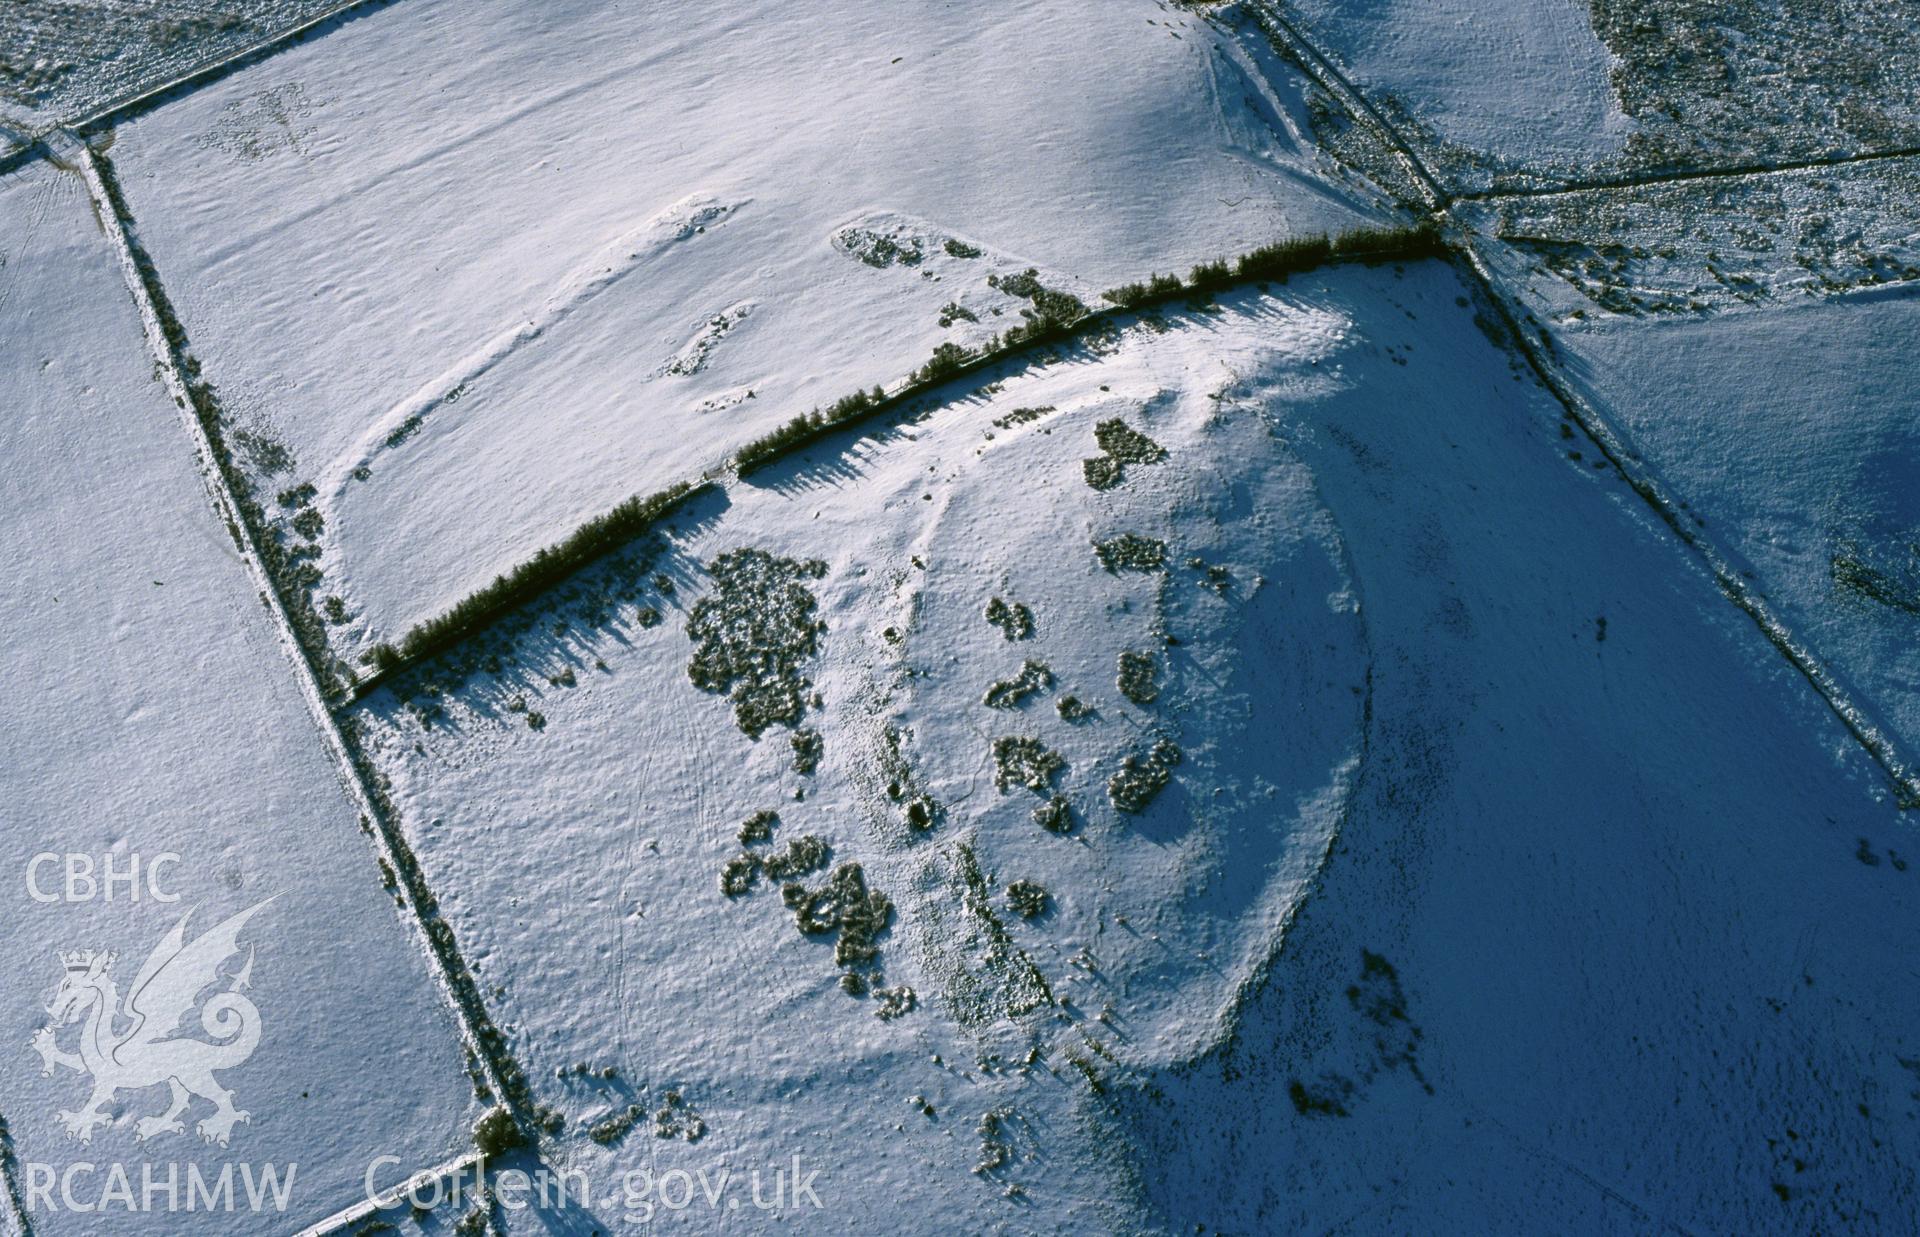 Slide of RCAHMW colour oblique aerial photograph of Caer Cadwgan, taken by T.G. Driver, 19/12/1999.